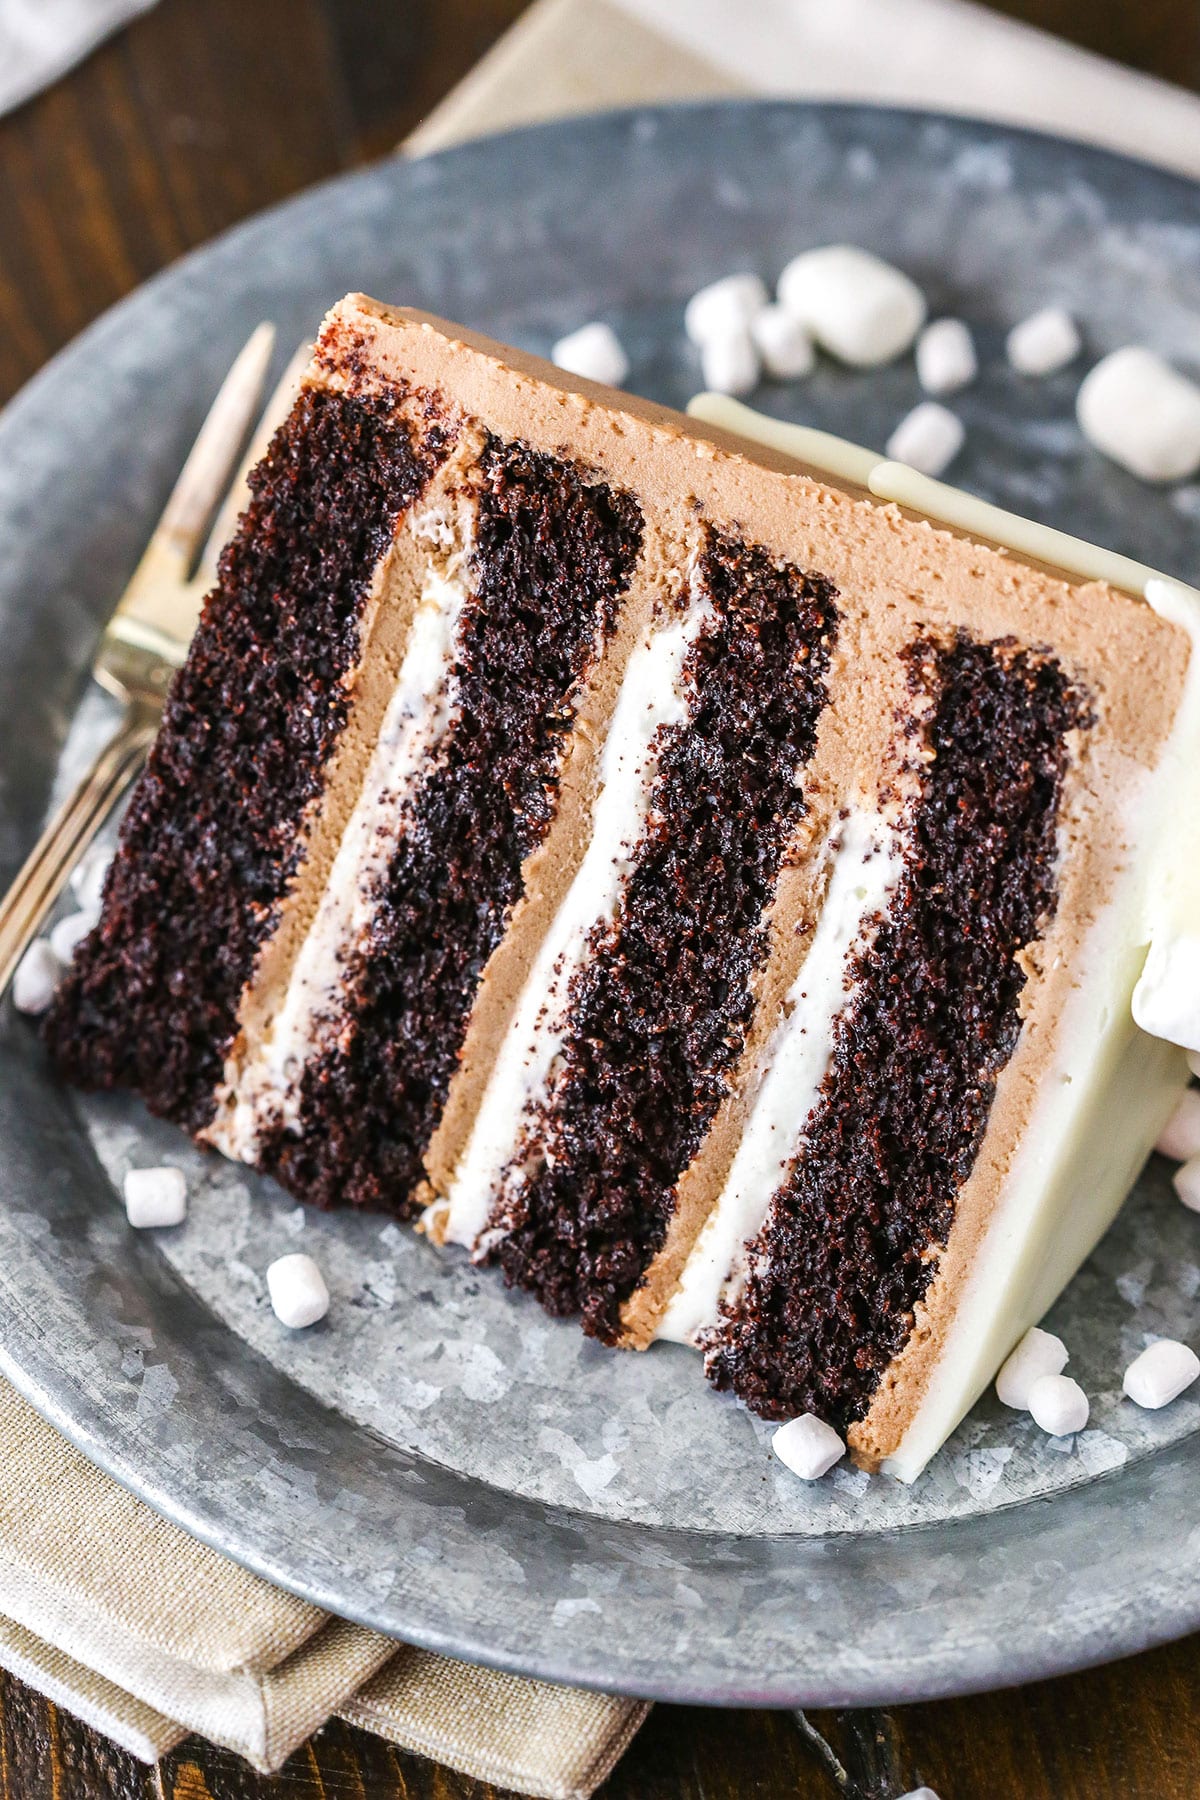 Chocolate Layer Cake Recipe (with Video) - NYT Cooking